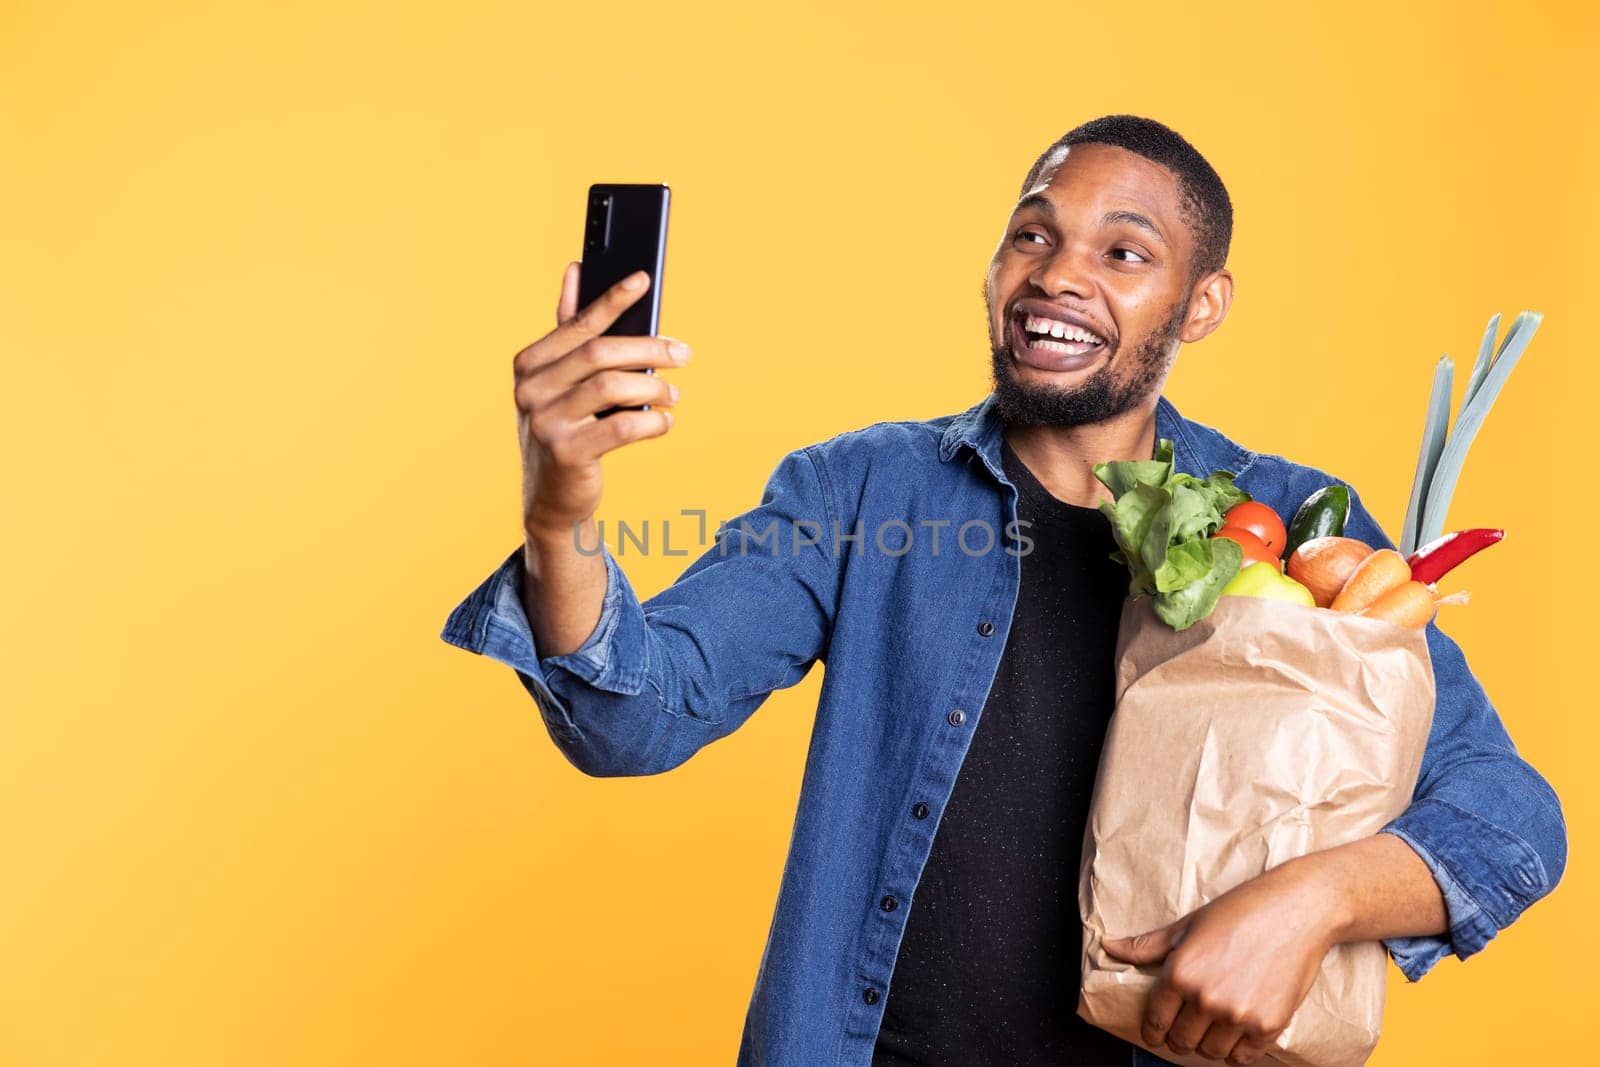 Smiling positive guy taking a picture with his bag of fresh produce, feels pleased with ethically sourced goods. Optimistic friendly person takes photos on his mobile phone app.